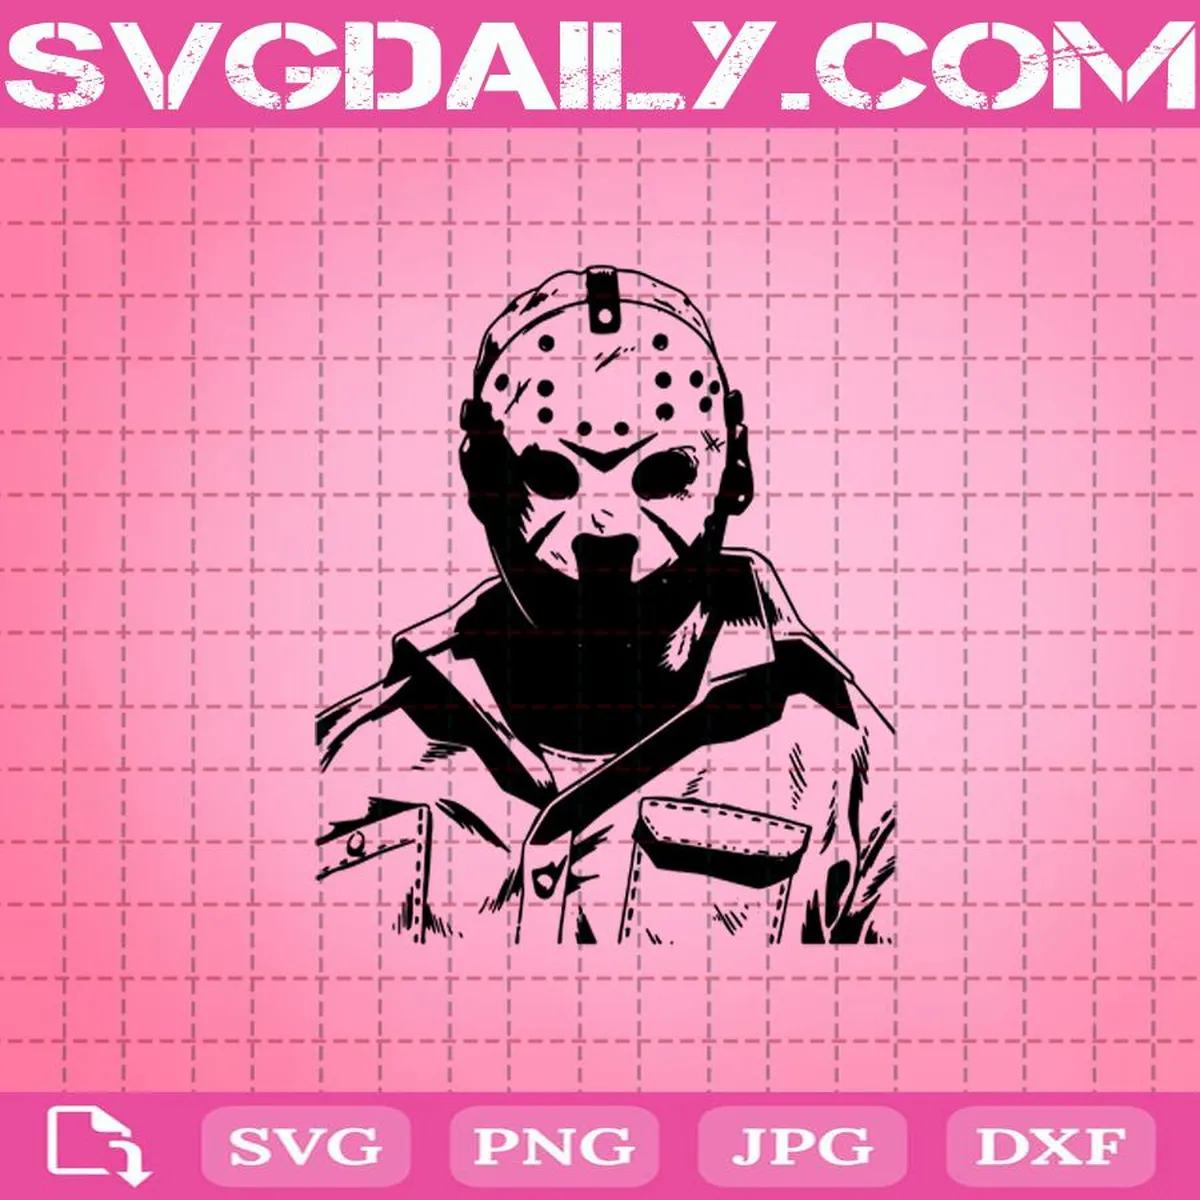 Jason Voorhees Friday The 13th Halloween Svg, Halloween Svg, Svg Png Dxf Eps Cut File Instant Download